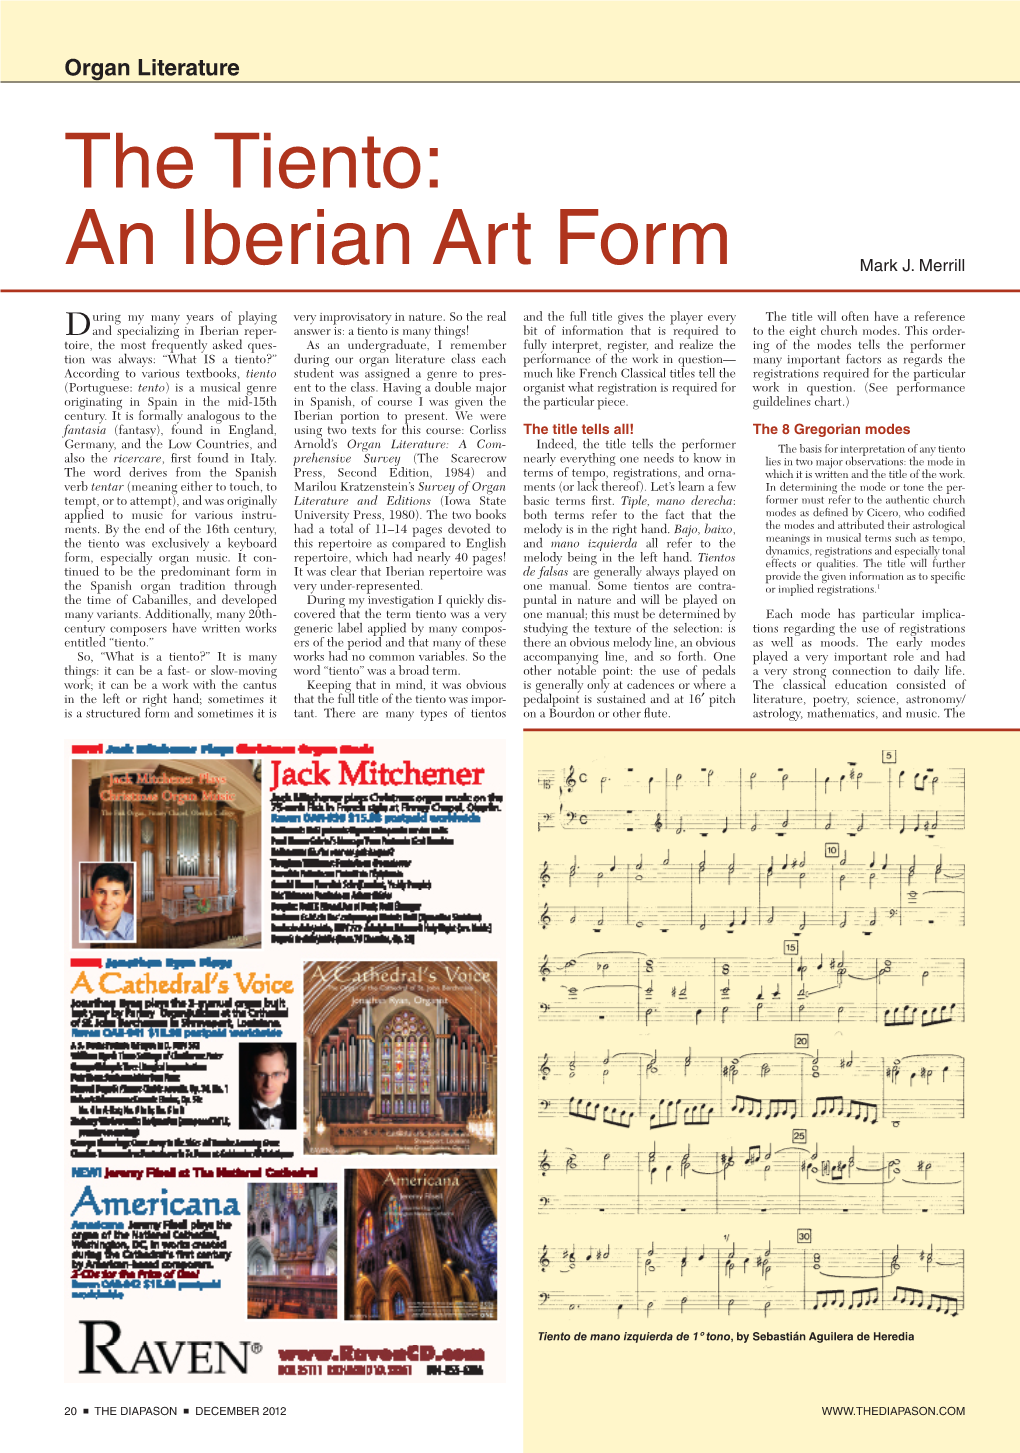 The Tiento: an Iberian Art Form